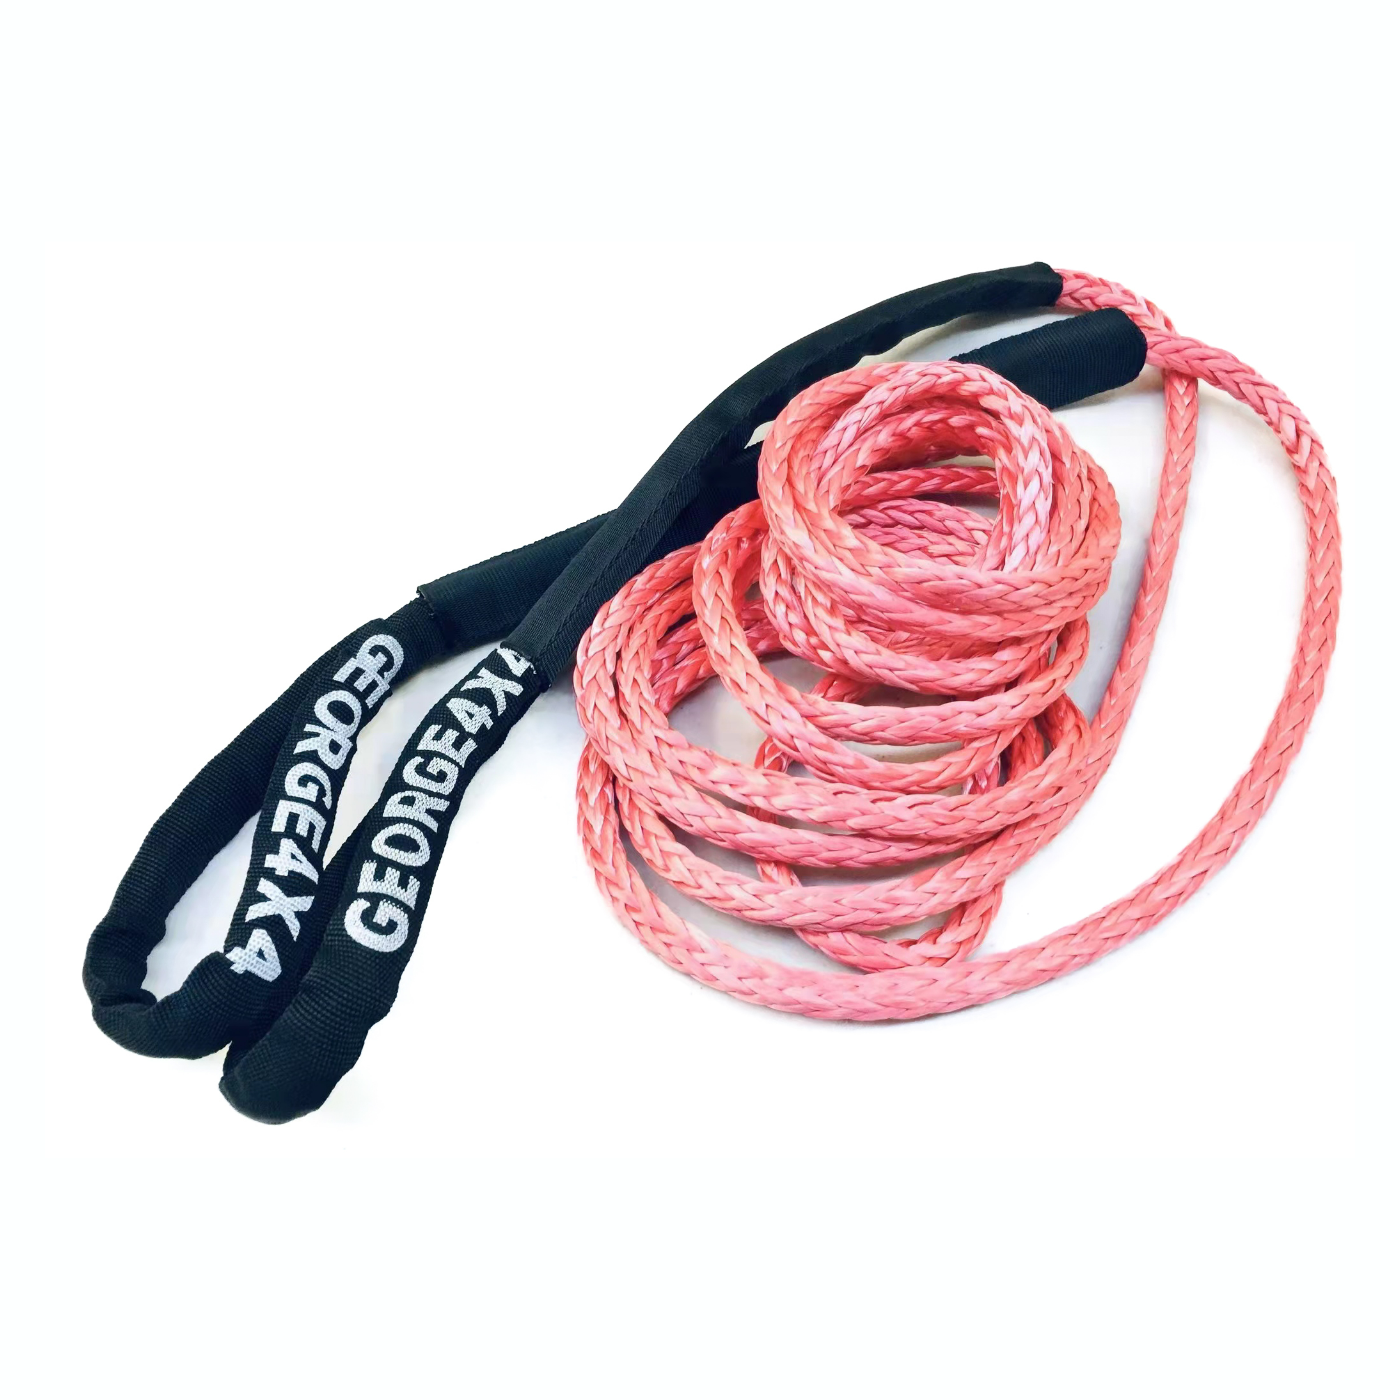 Synthetic Winch Ropes, Kinetic Recovery Straps & 4x4 Accessories